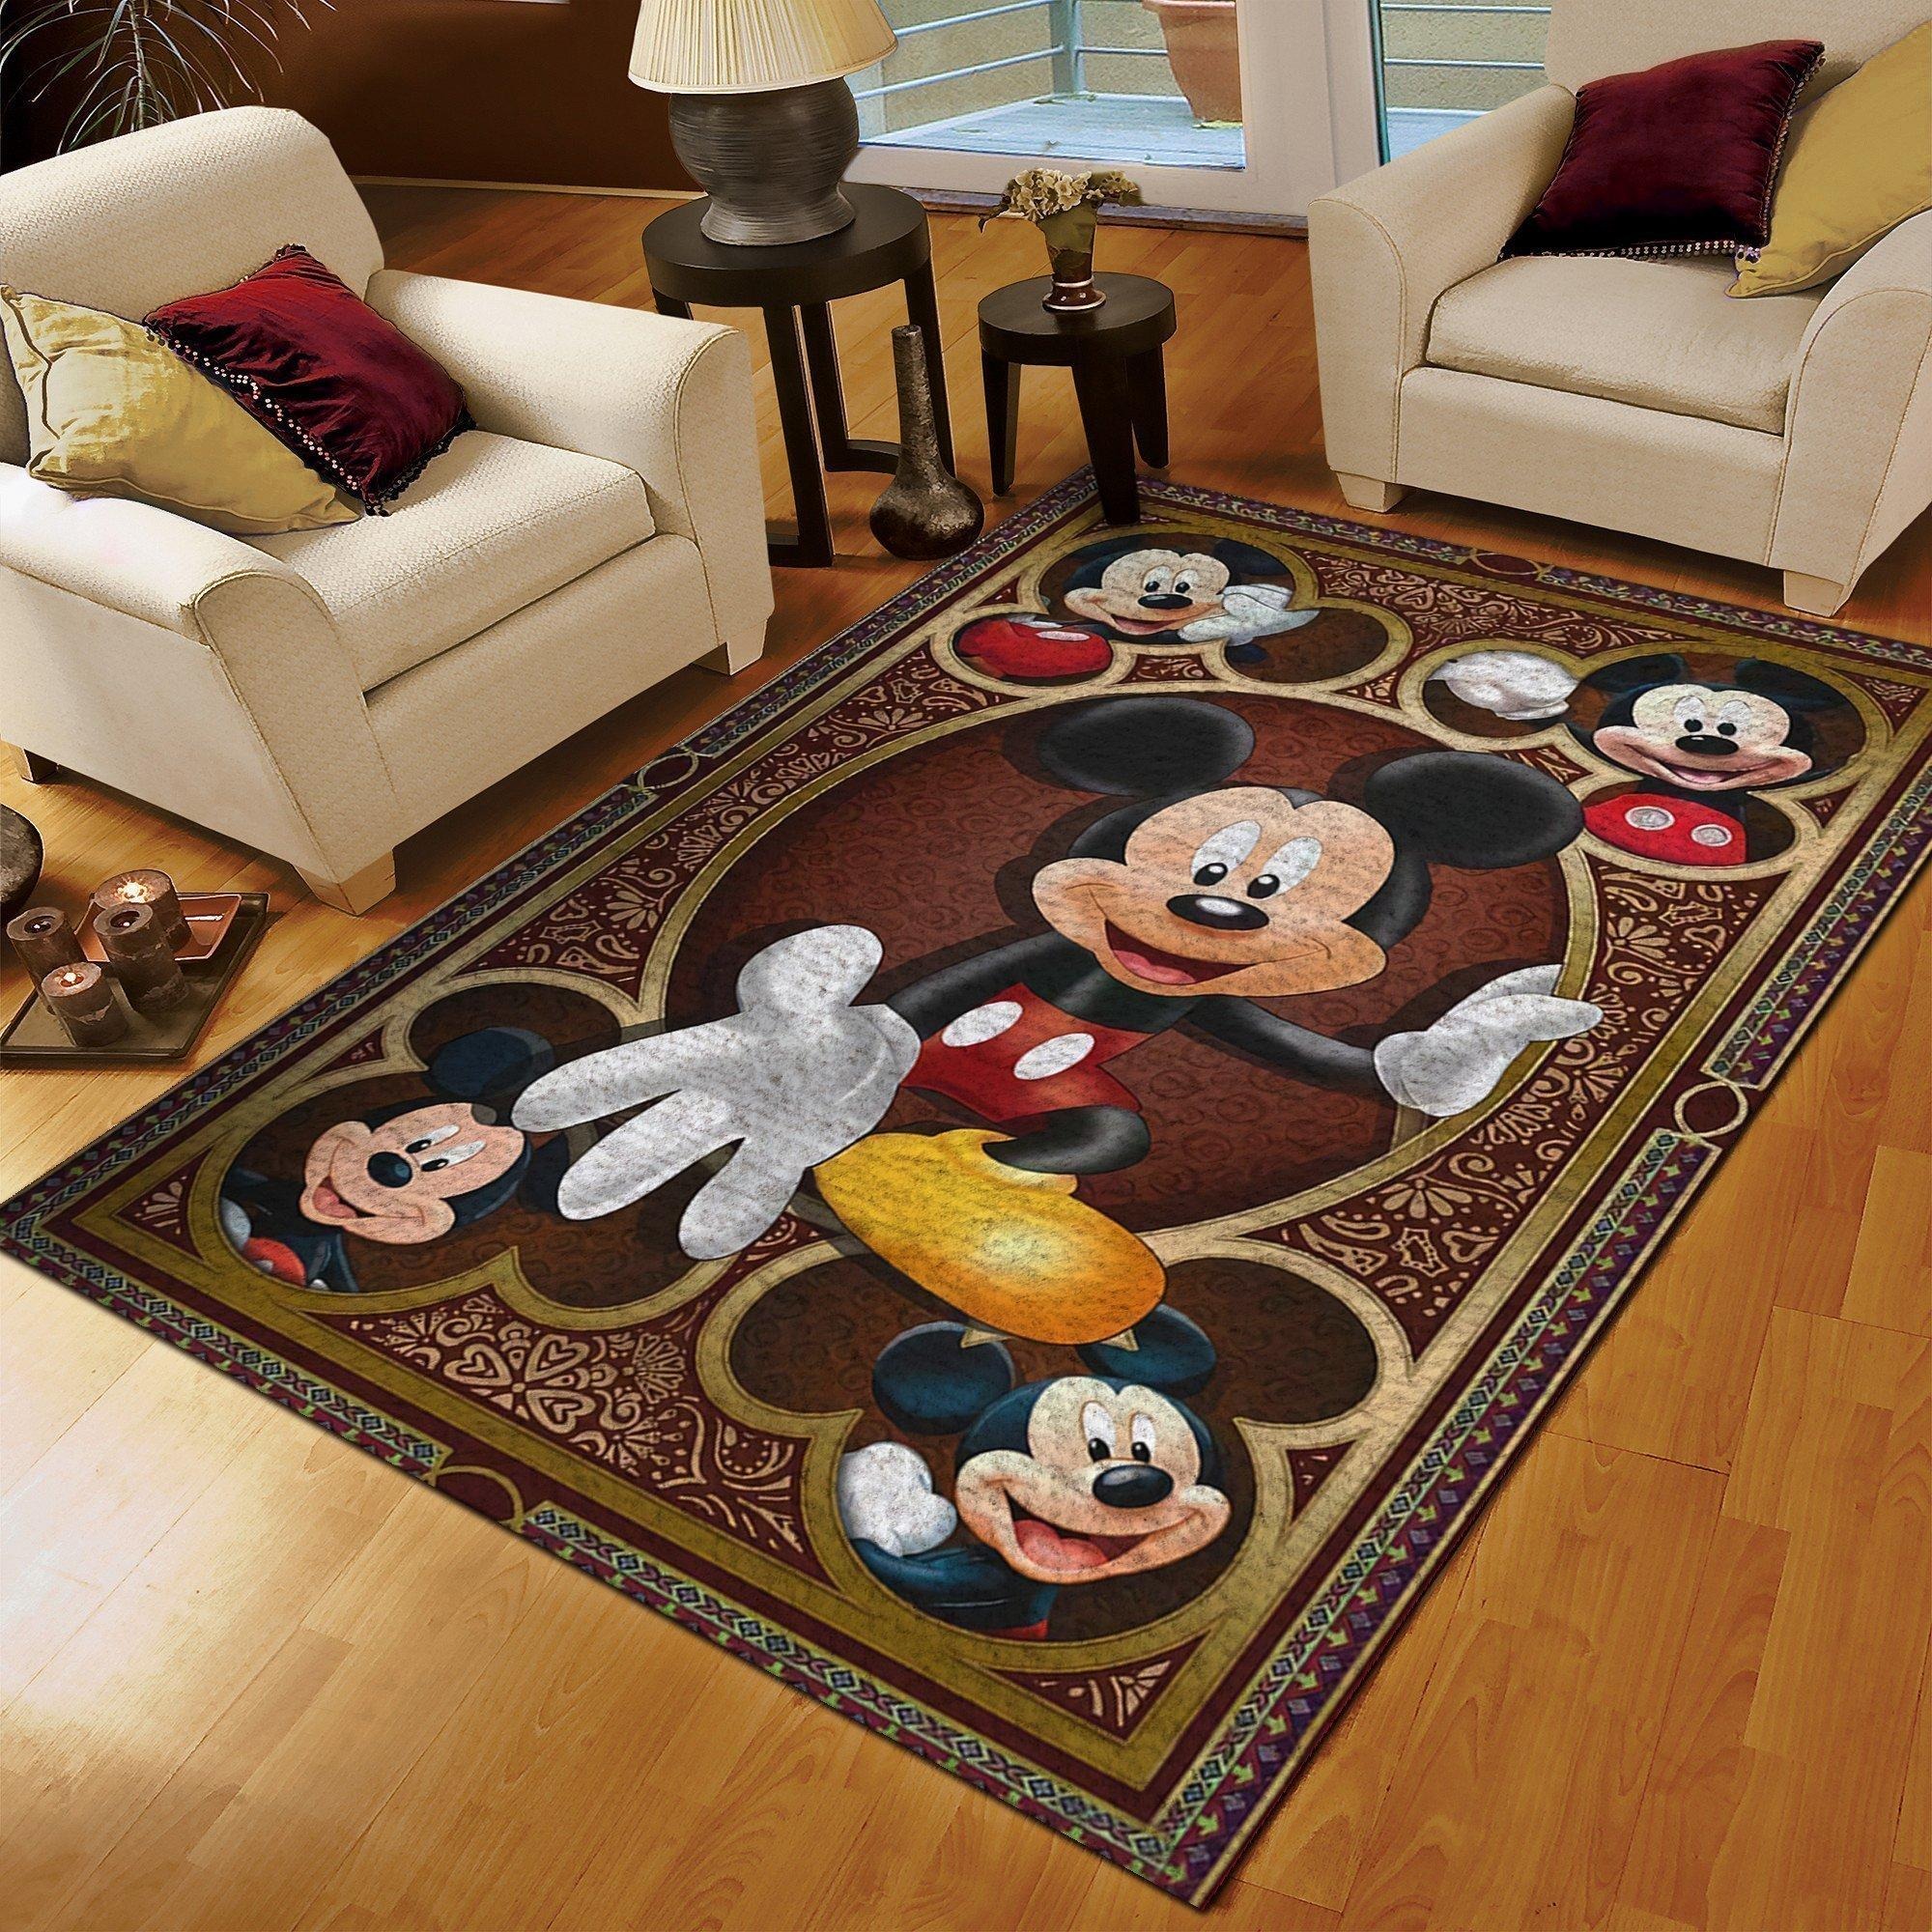 10 Off Mickey Mouse Rug, Mickey Mouse Rugs Carpets